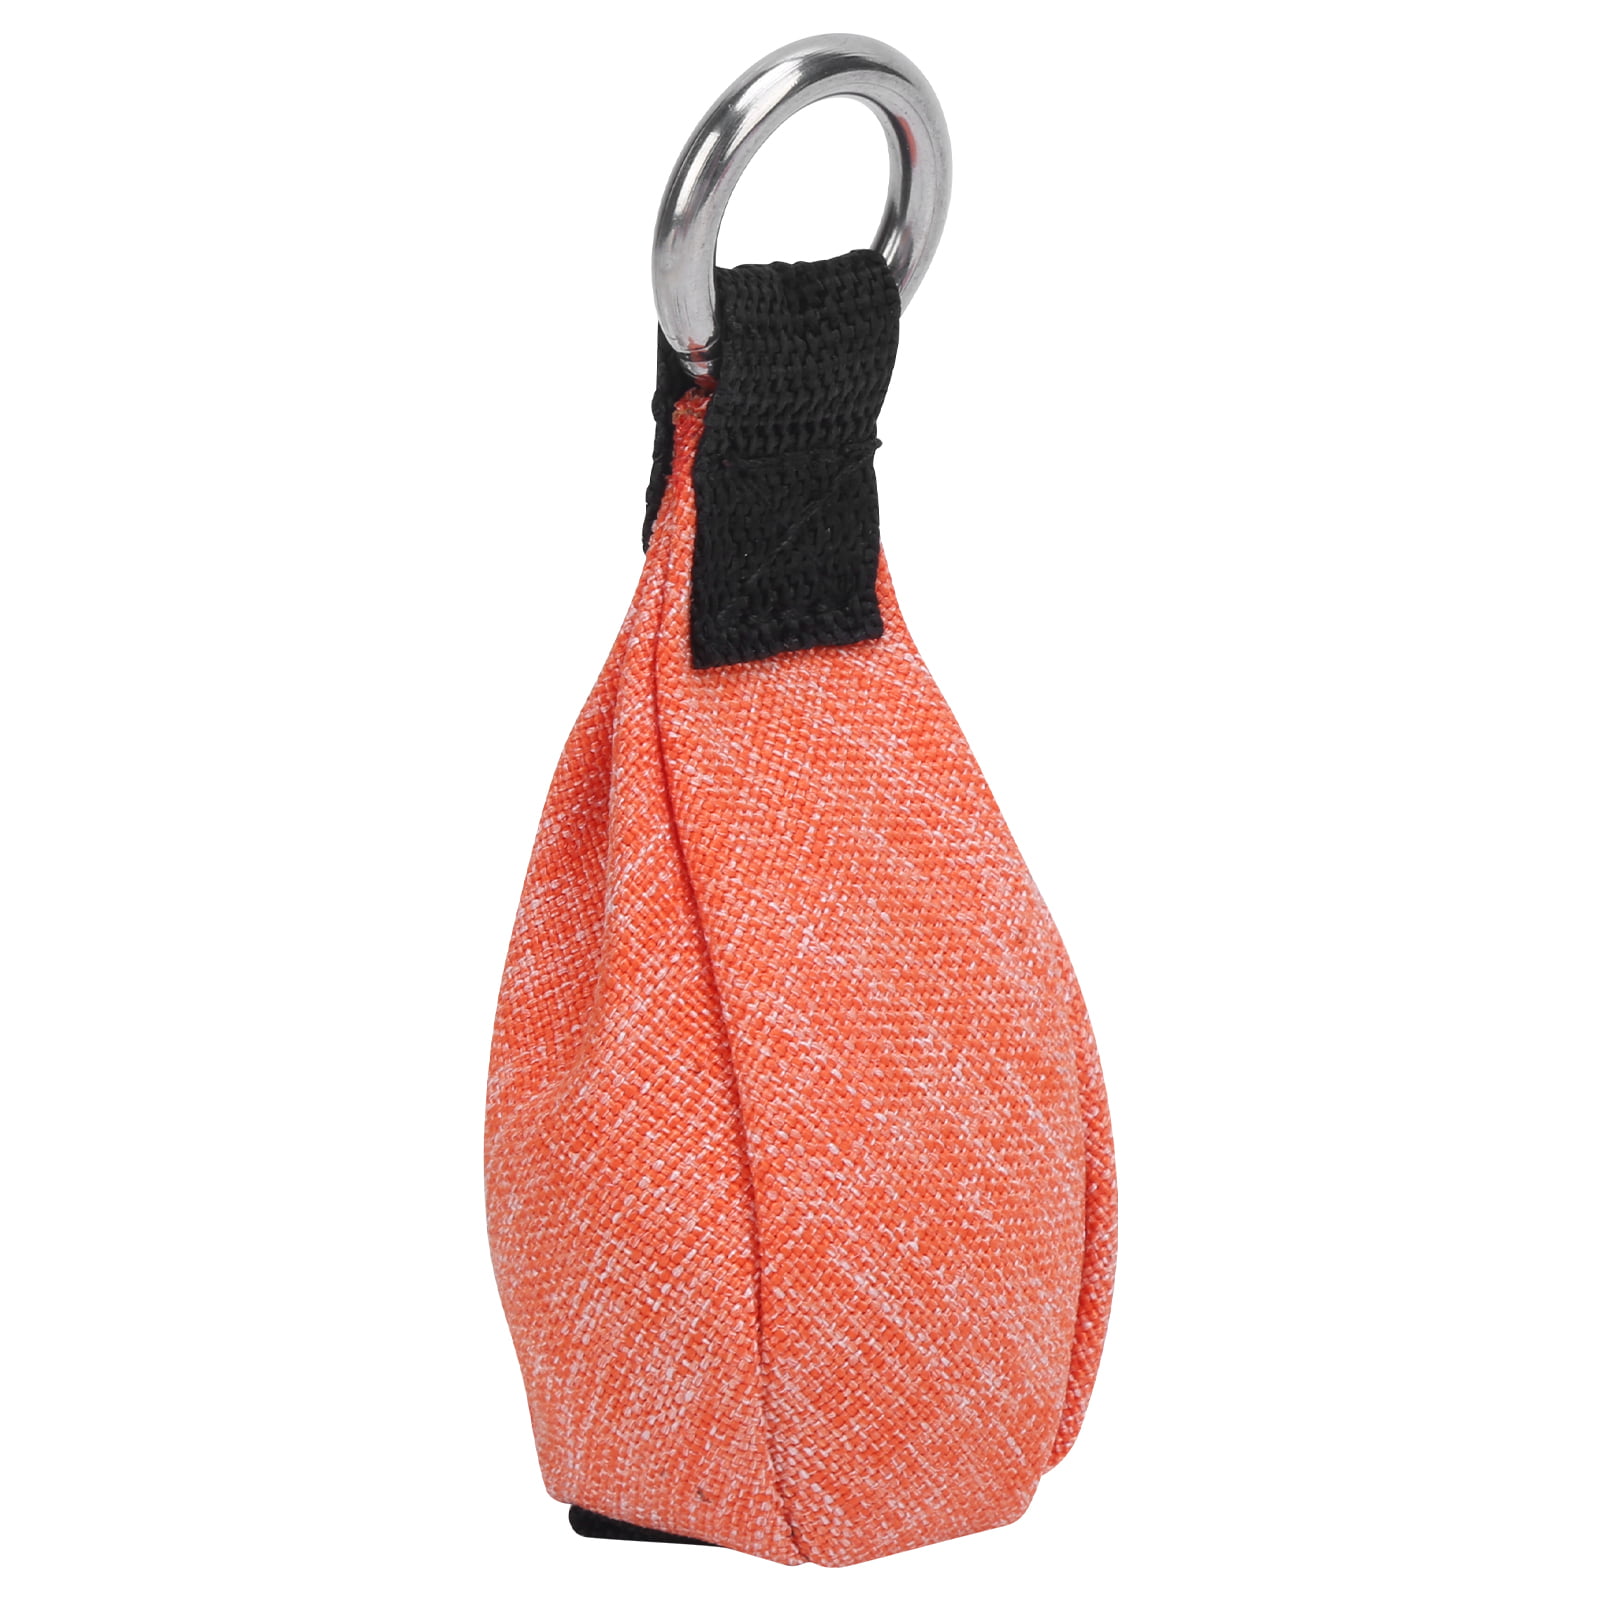 Arborist Throw Weight Bag Pouch Tree Climbing Tools Accessories 300g/10.6oz 